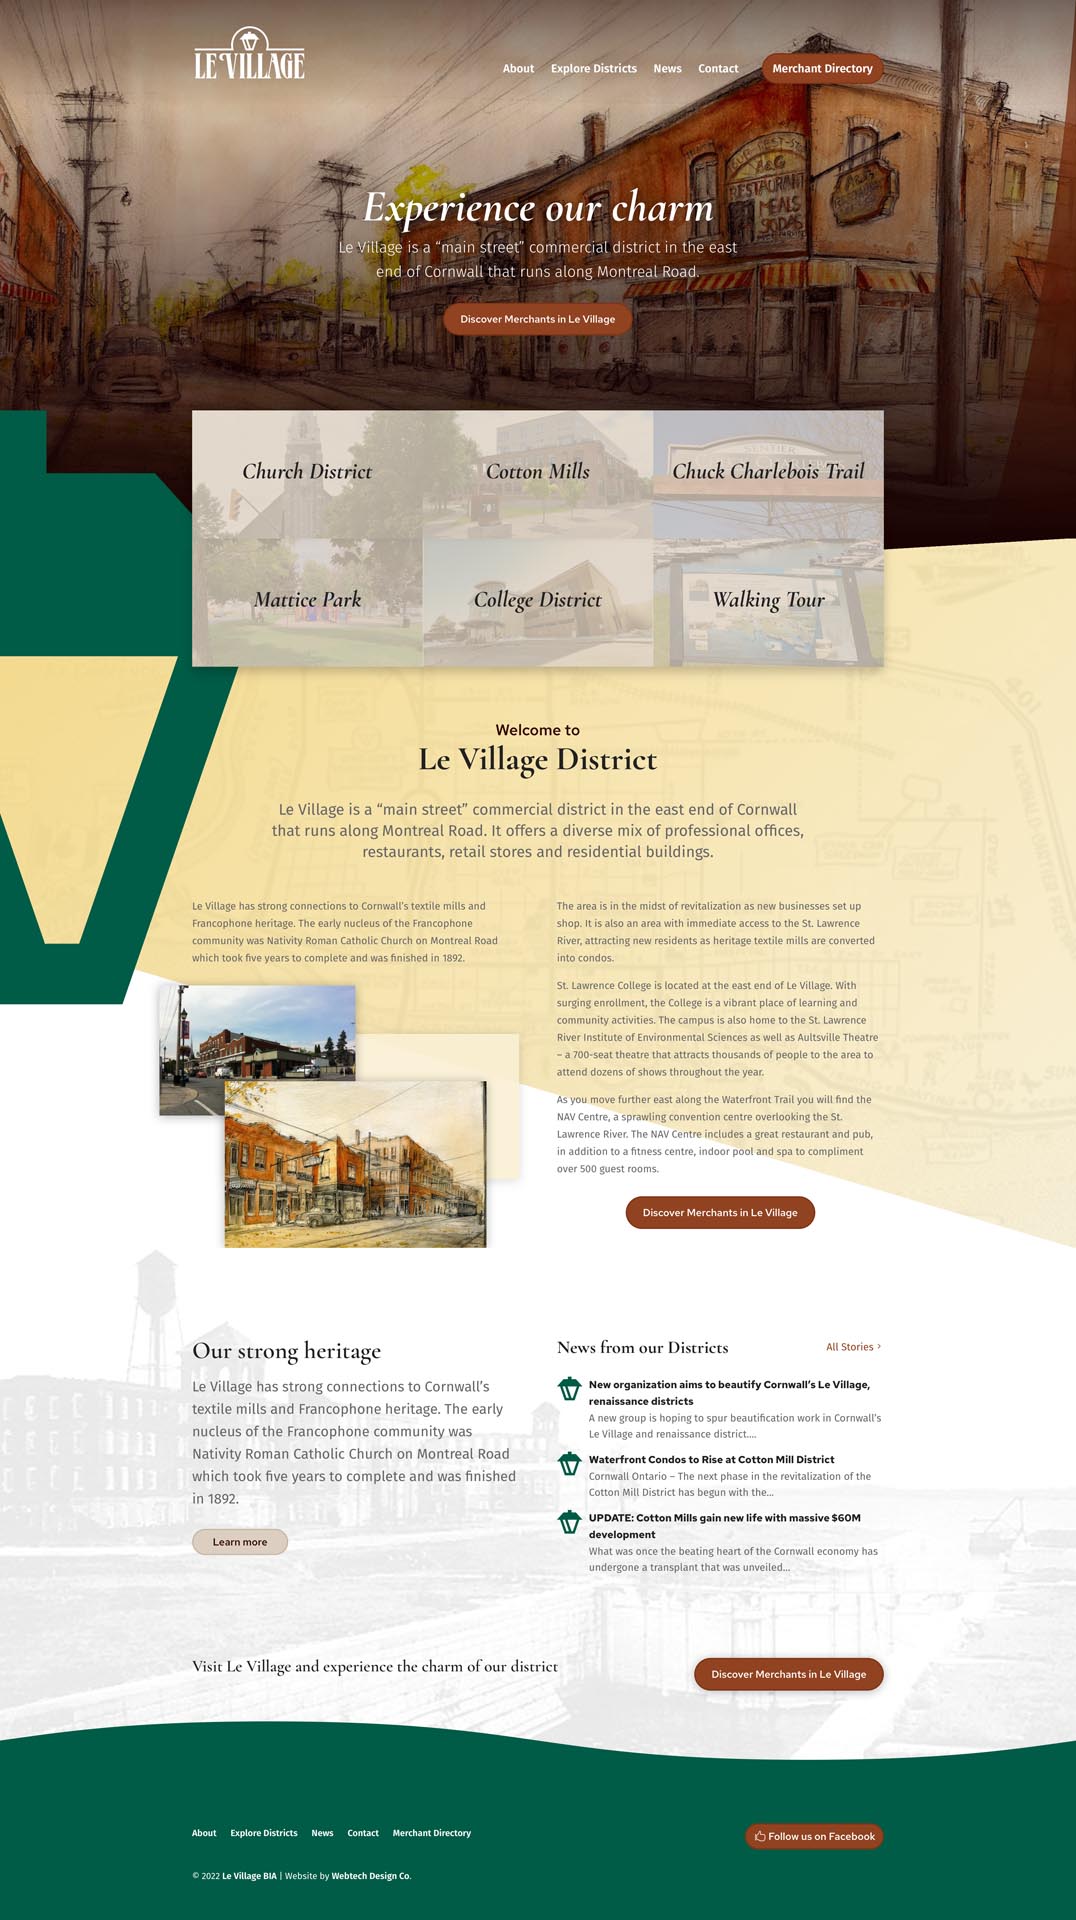 Not-For-Profit website design services for Le Village in in Cornwall